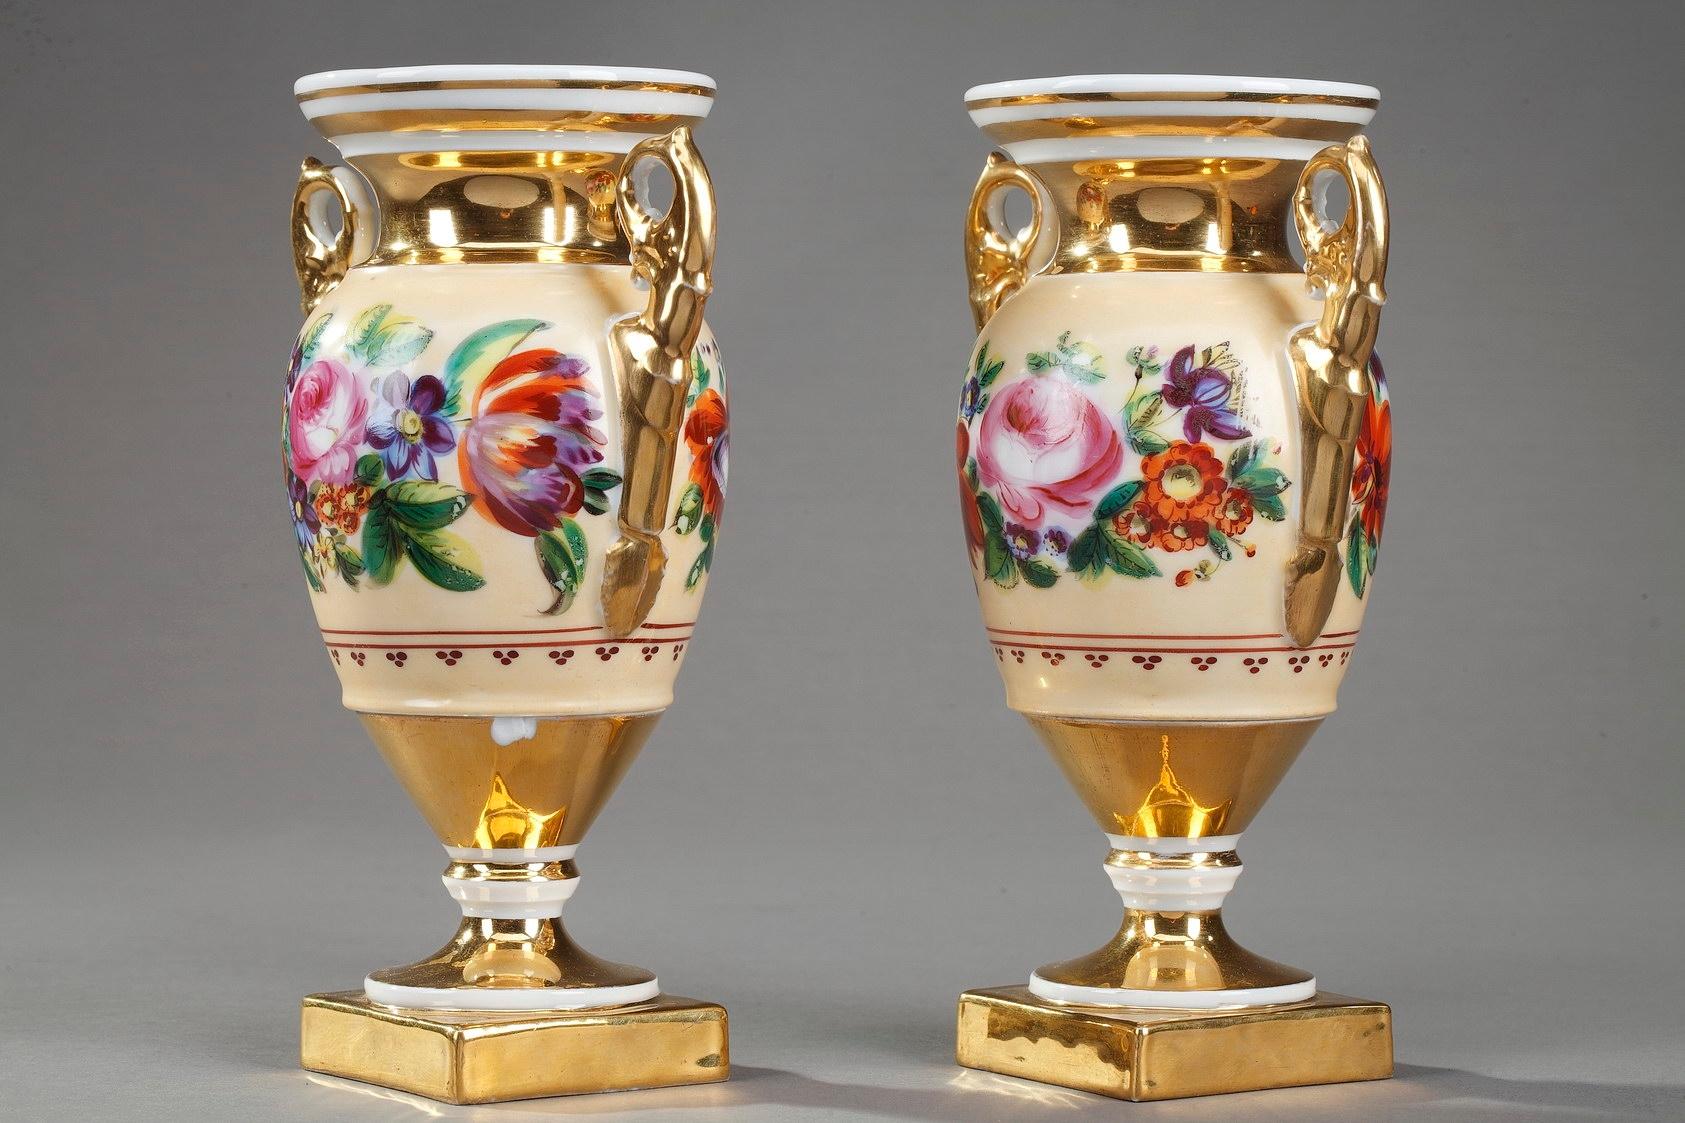 Pair of small gilded and white porcelain vases with an Etruscan shape. The body of the vases is in light ochre, and decorated with a highly detailed frieze of bright, polychromatic flowers. These centerpiece vases feature short handles accented with